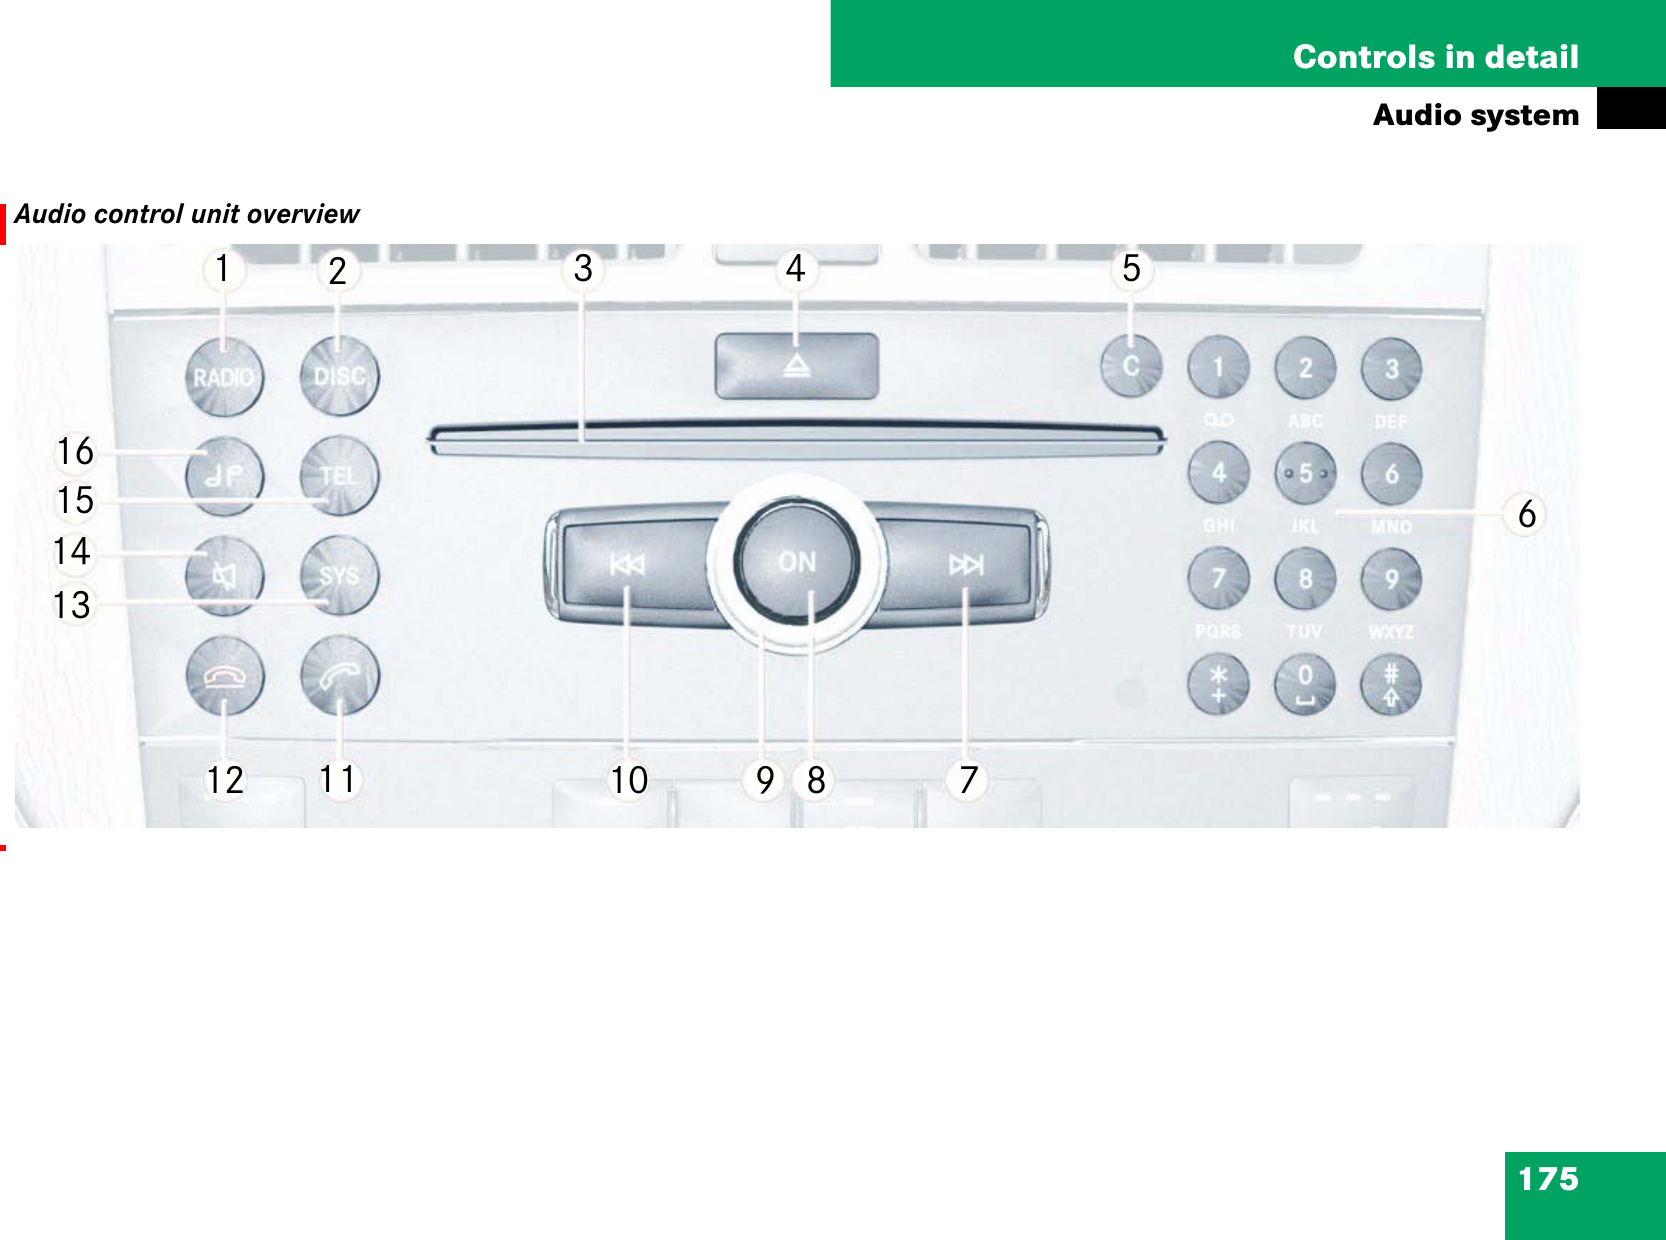 175Controls in detailAudio systemAudio control unit overview1516141312 11 10 9 8 7654321